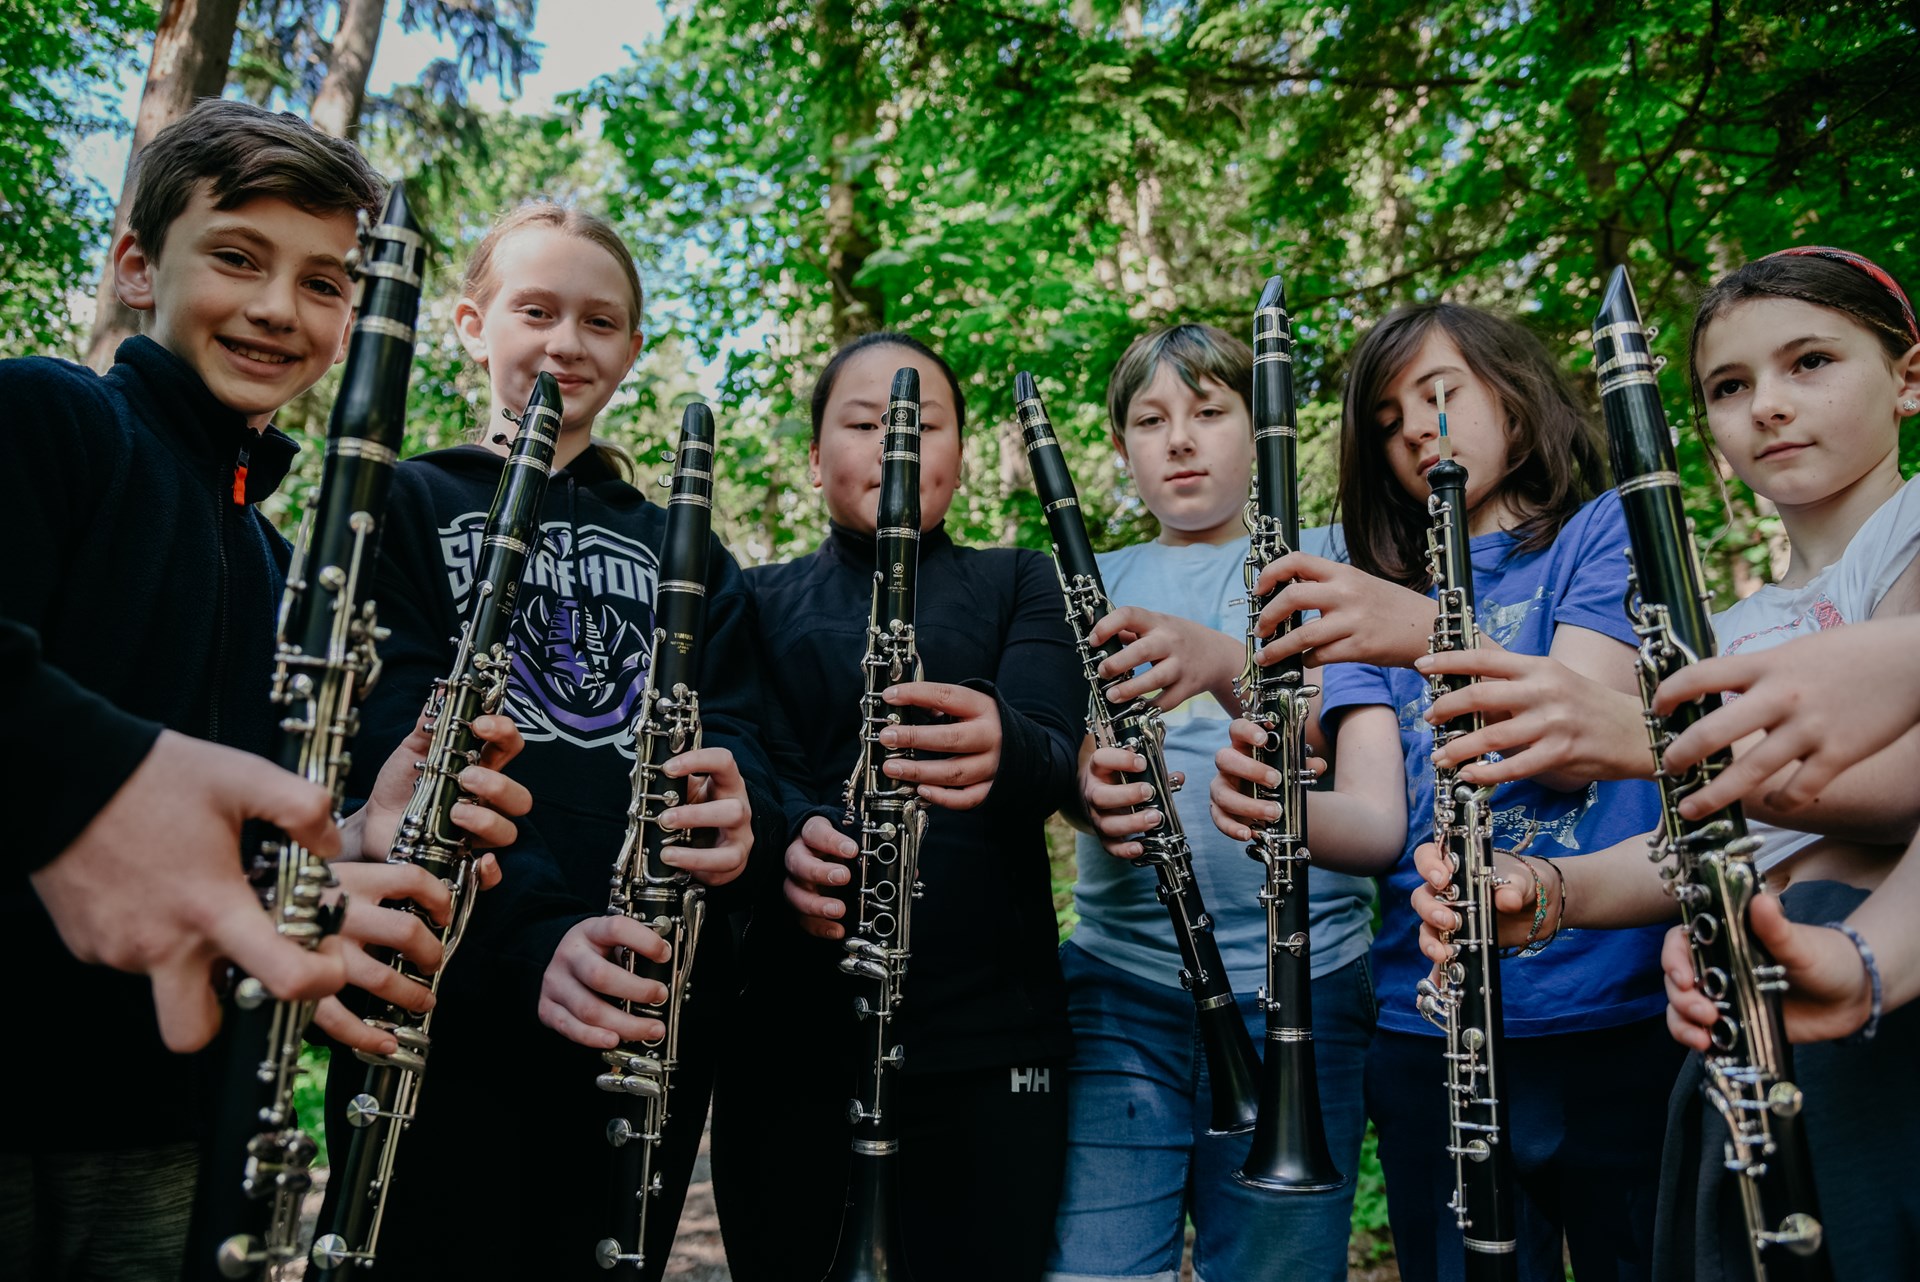 Six elementary students playing wind instruments outside in the forest on a sunny day.